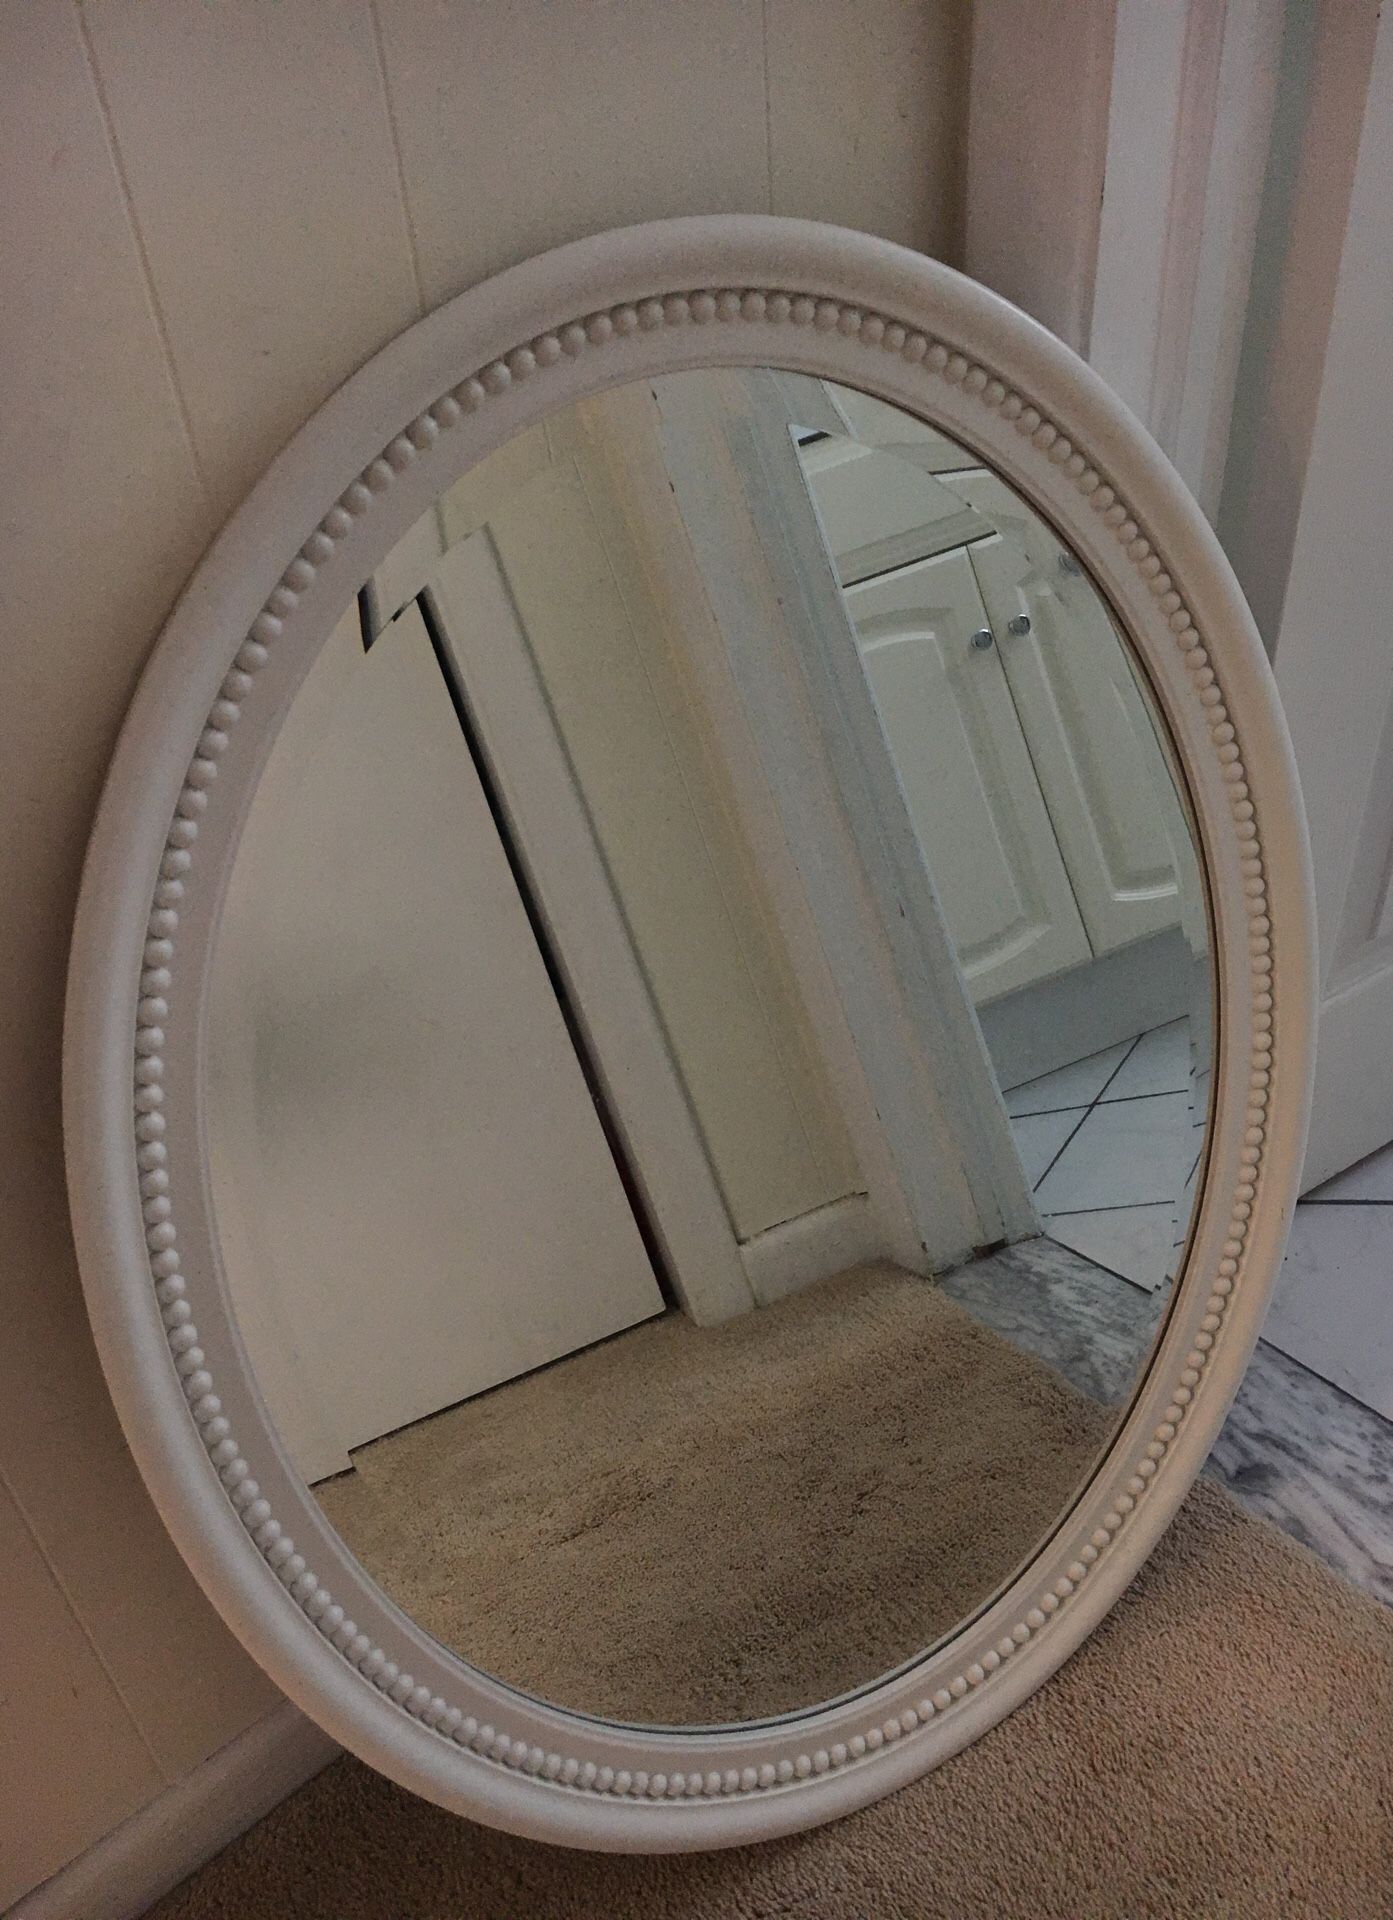 Vanity mirror from Crate and Barrel